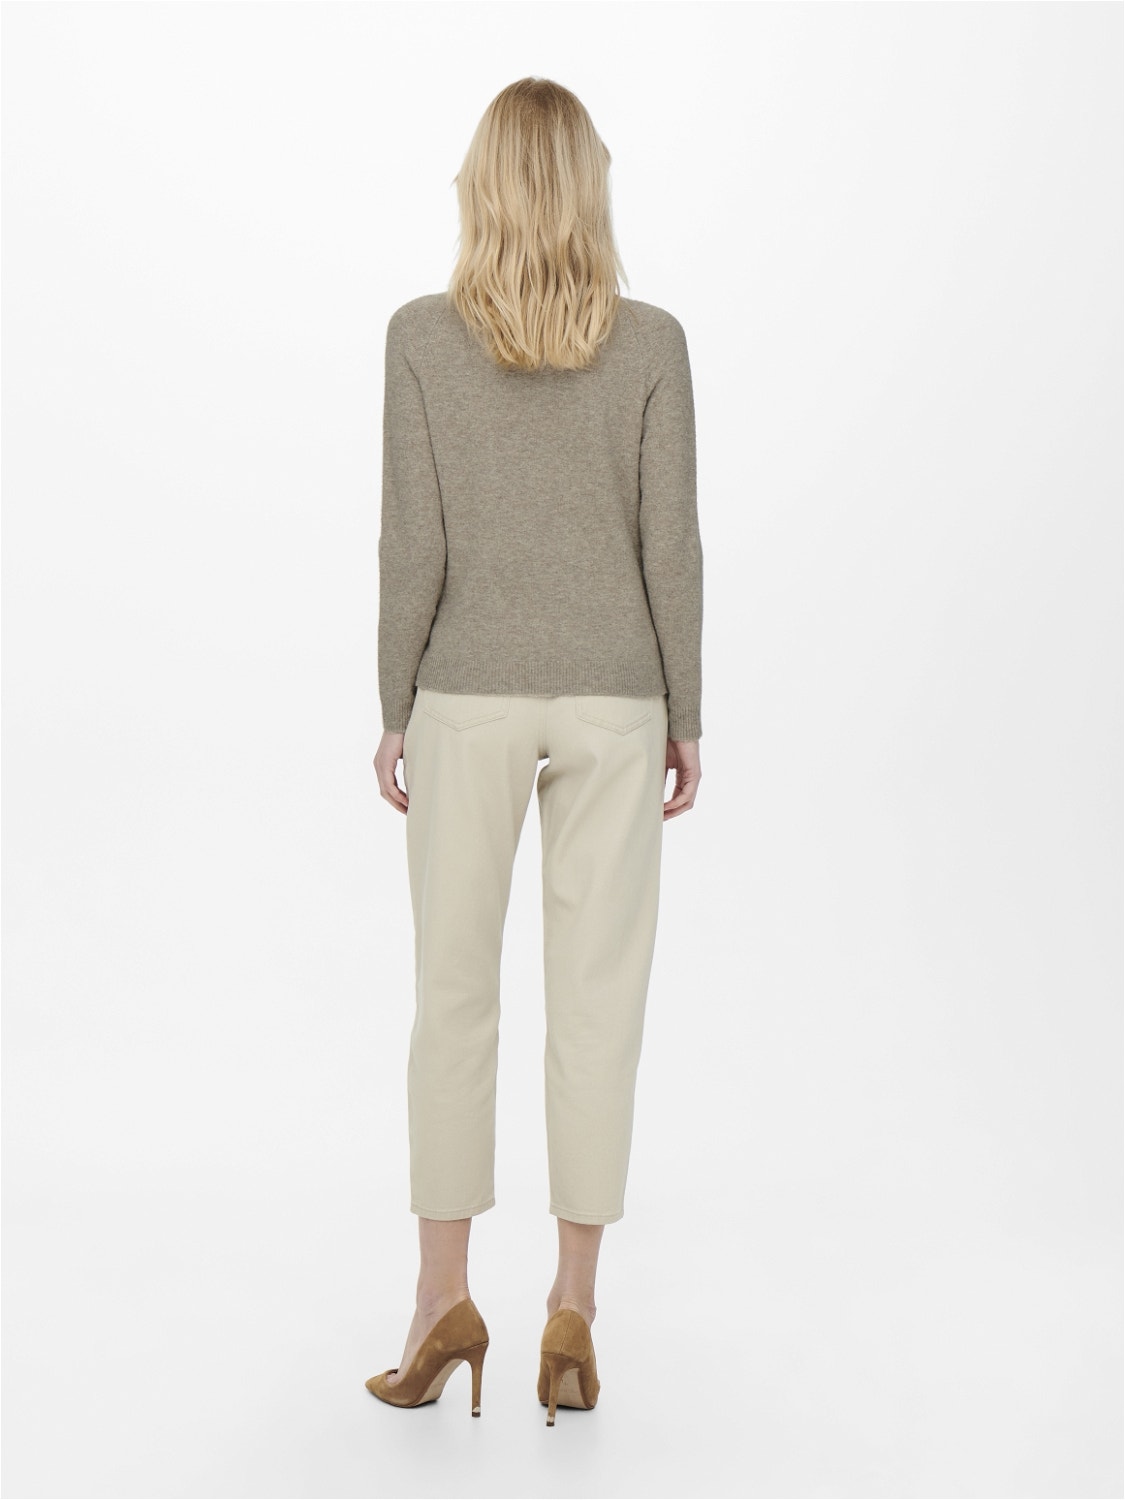 ONLY high neck knitted pullover -Beige - 15204279